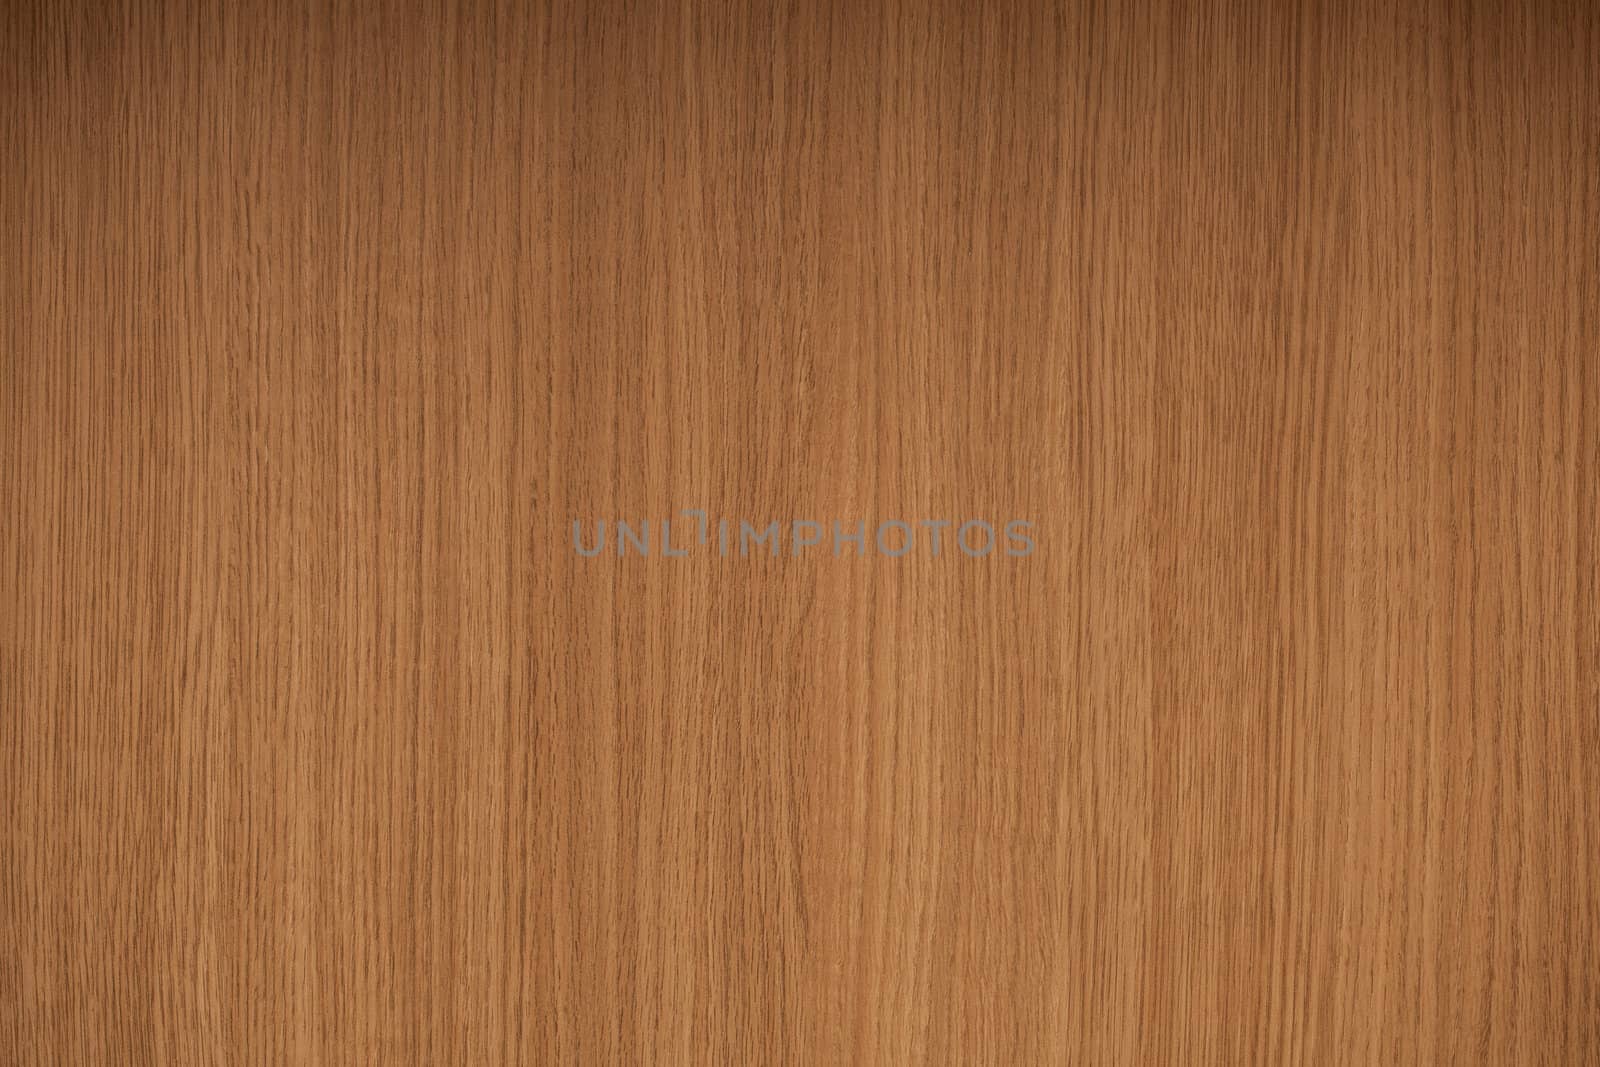 A close-up image of a wooden texture background. Check out other textures in my portfolio.